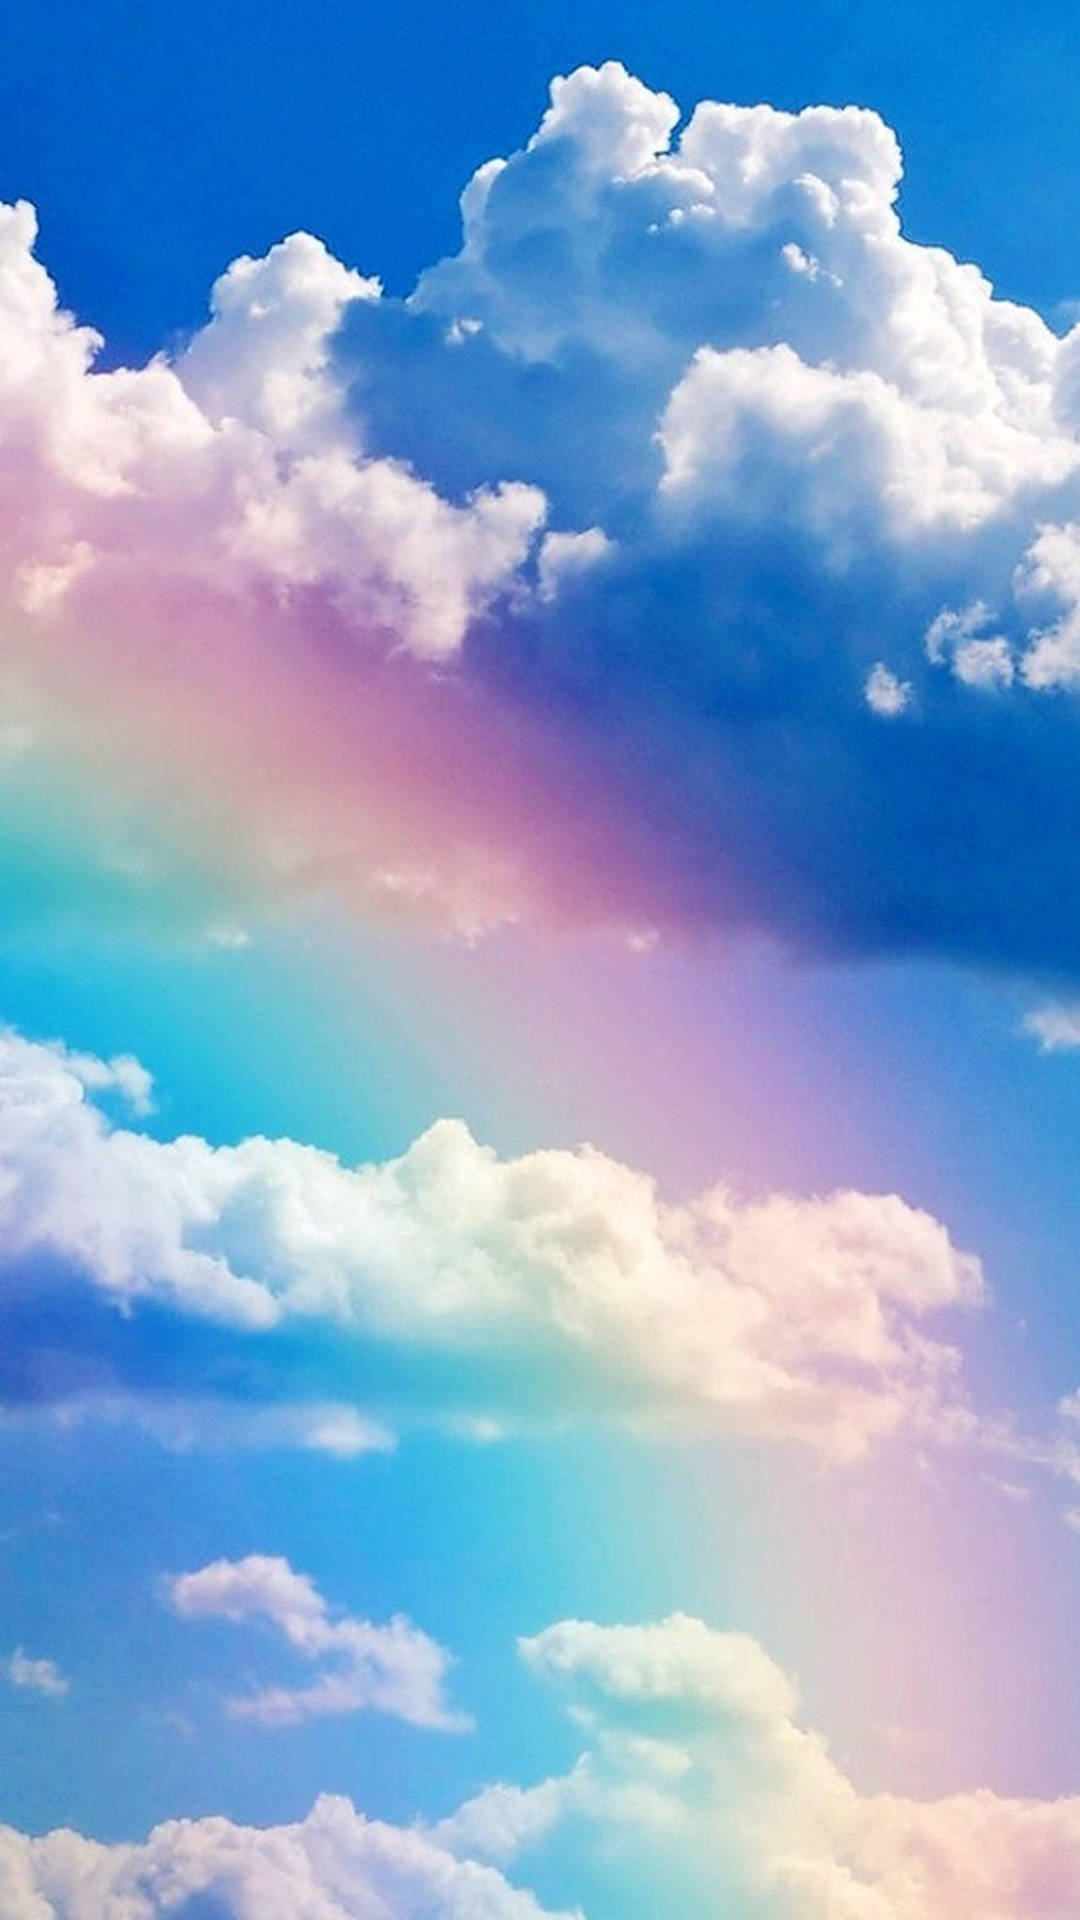 Cloudy Weather With Rainbow Wallpaper